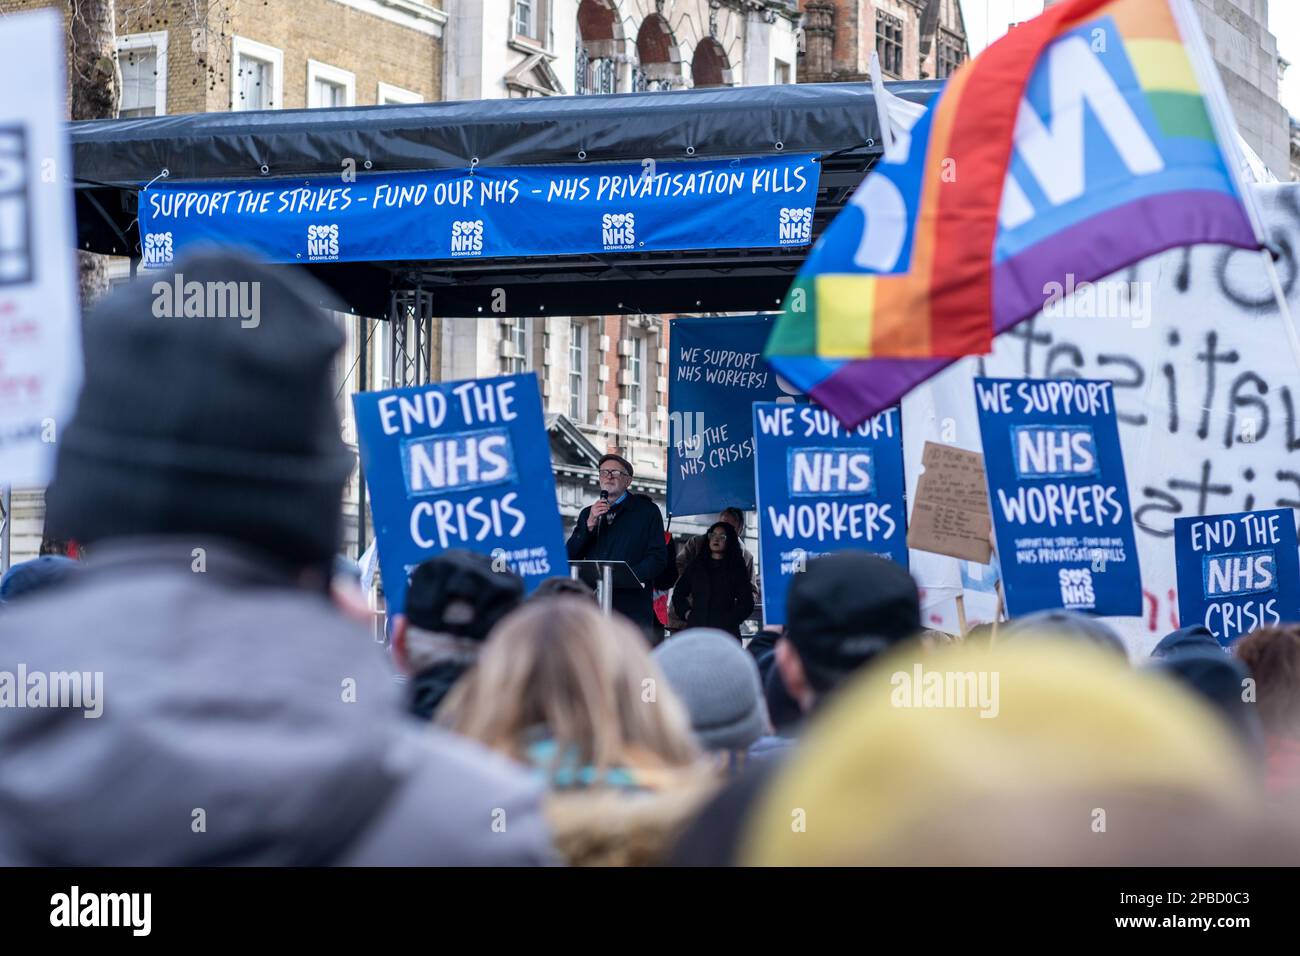 Jeremy Corbyn gives rousing speech at NHS rally which culminated in Whitehall, London. NHS protest banners. Stock Photo